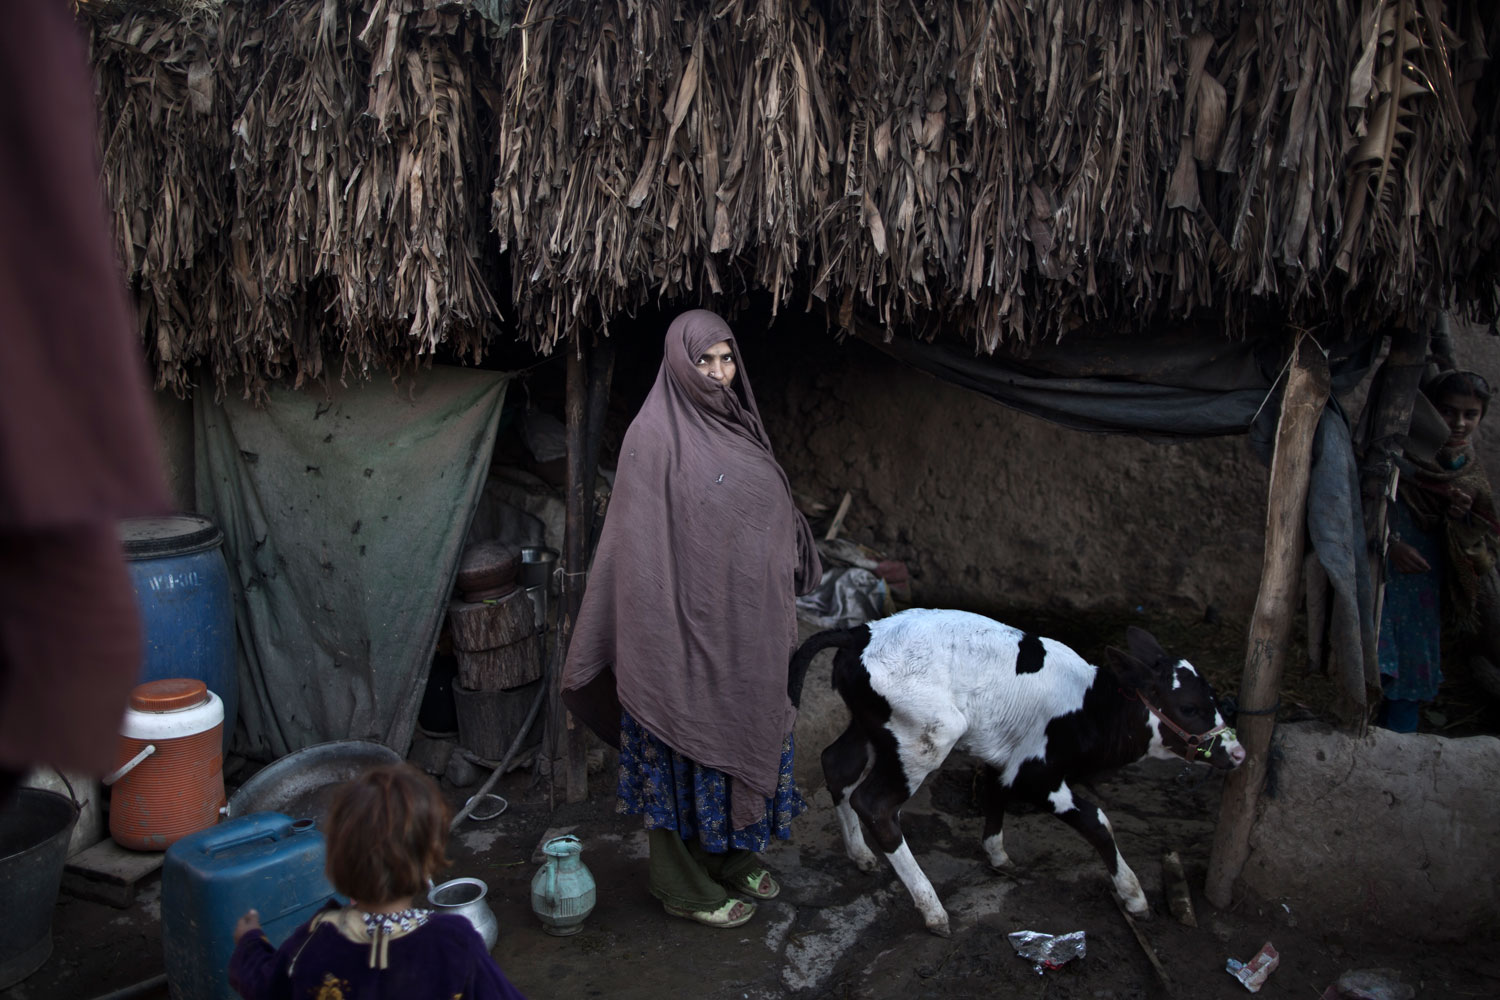 Torbakey Haidar, 45, a mother of 7 children, at her mud house in a slum on the outskirts of Islamabad on March 29, 2014. Haidar and her family fled Afghanistan's border town of Torkham six years ago due to the violence and took refuge in Pakistan.
                              
                               Because of the war we left our home. I want my children to grow up in Pakistan. We are not respected in Pakistan as refugees, but as a mother  I am happy to be here and to face anything just to feel that my children are safe.